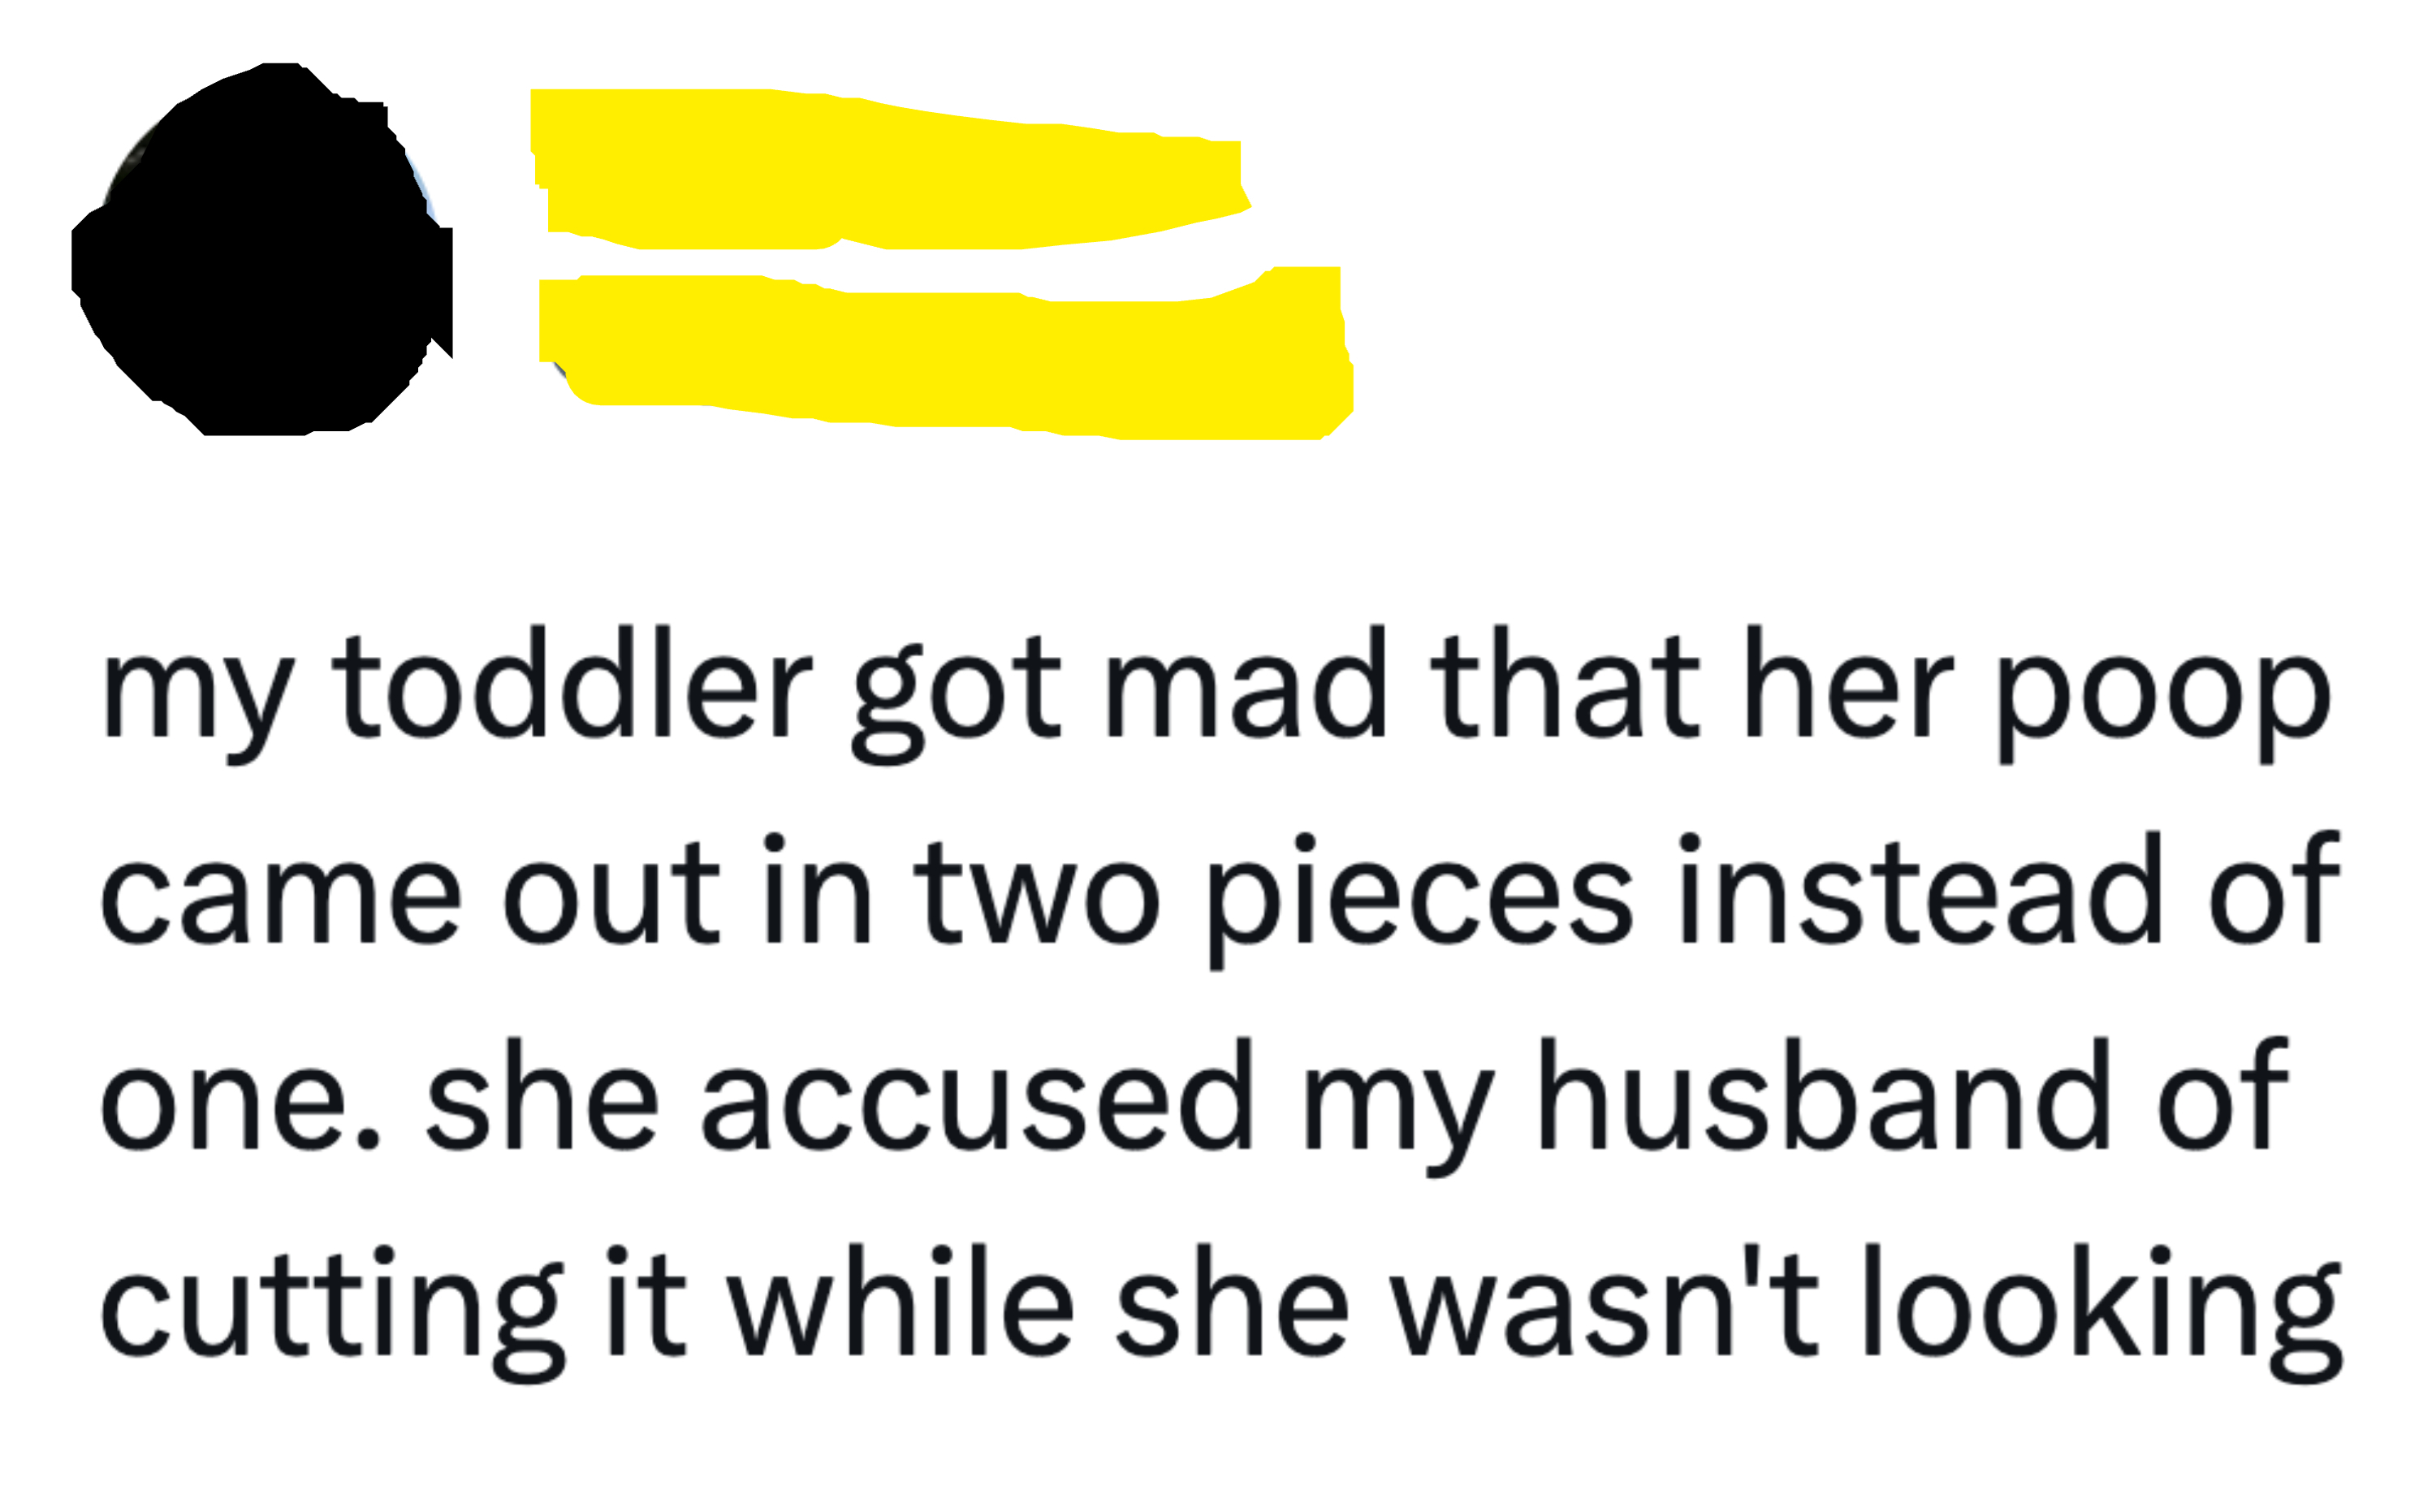 &quot;she accused my husband of cutting it while she wasn&#x27;t looking&quot;